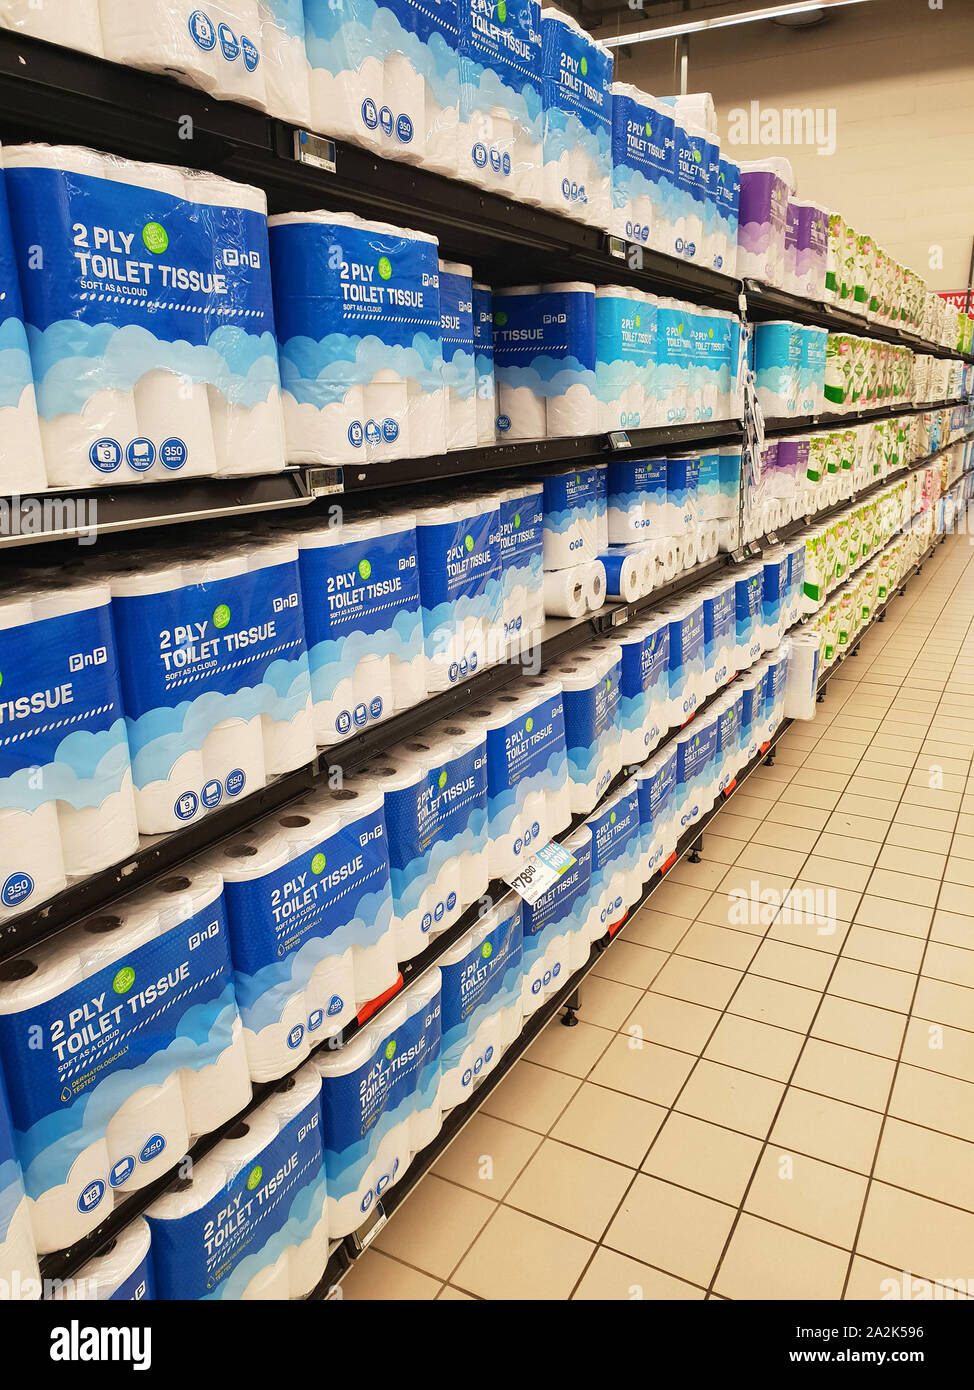 Toilet paper aisle in a Pick n Pay supermarket, South Africa Stock Photo